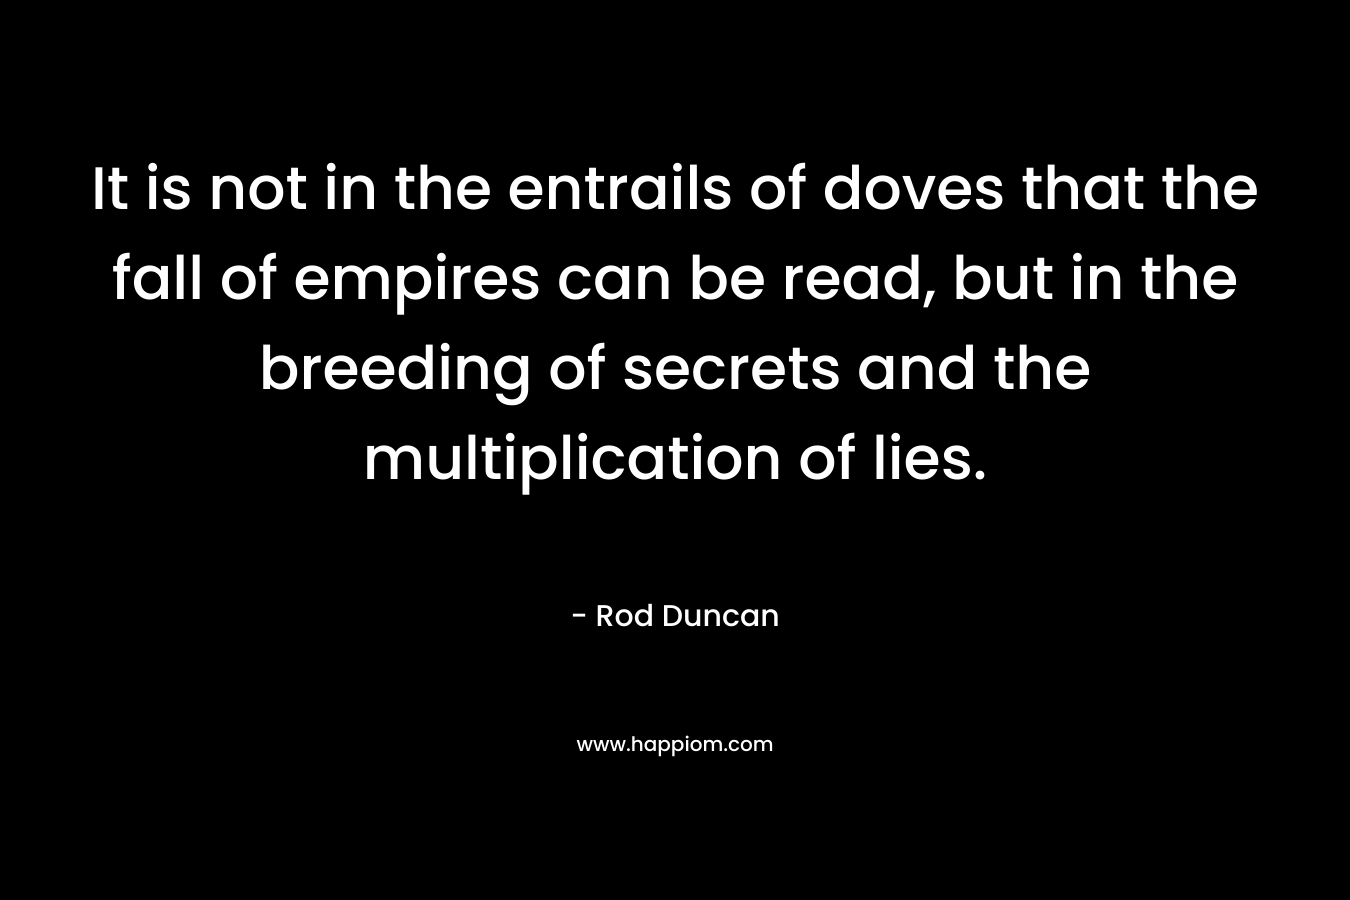 It is not in the entrails of doves that the fall of empires can be read, but in the breeding of secrets and the multiplication of lies. – Rod Duncan